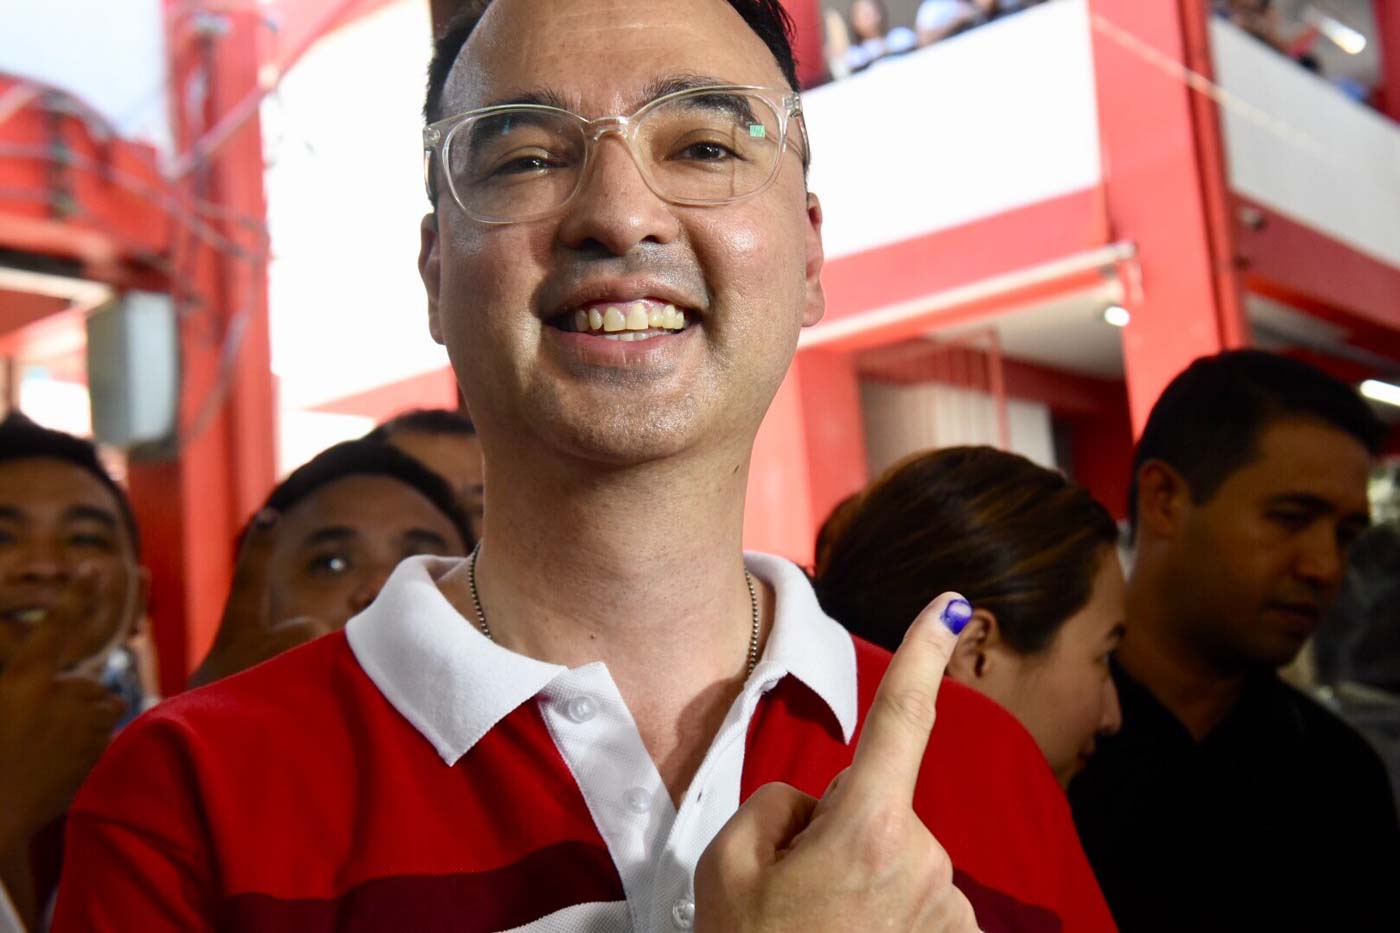 GHOST OF ELECTIONS PAST. Alan Peter Cayetano, then candidate for Taguig-Pateros congressman, shows the indelible ink on his finger after casting his vote on May 13, 2019. File photo by Angie de Silva/Rappler 